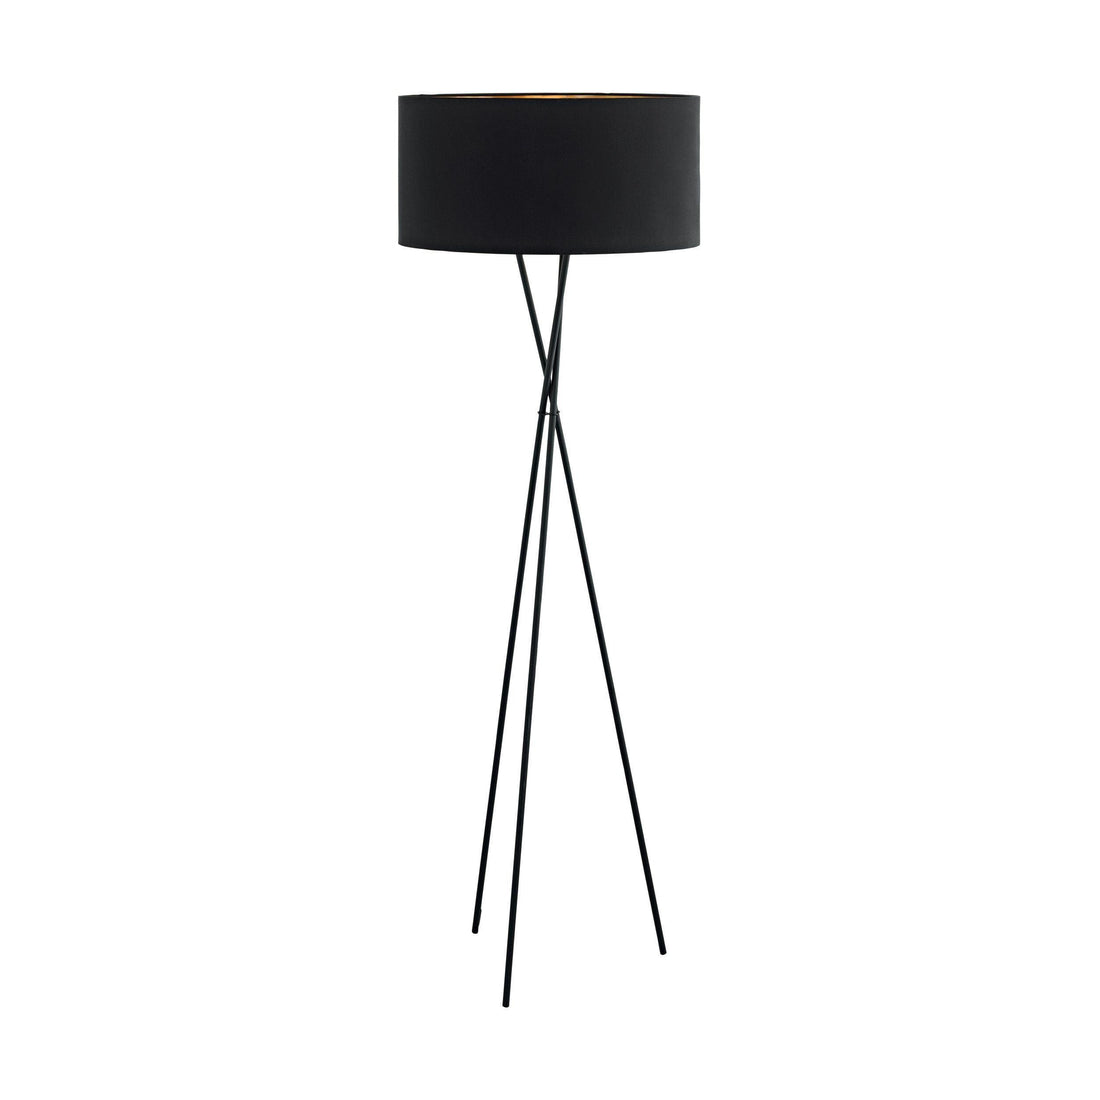 FONDACHELLI Floor Lamp by The Light Library